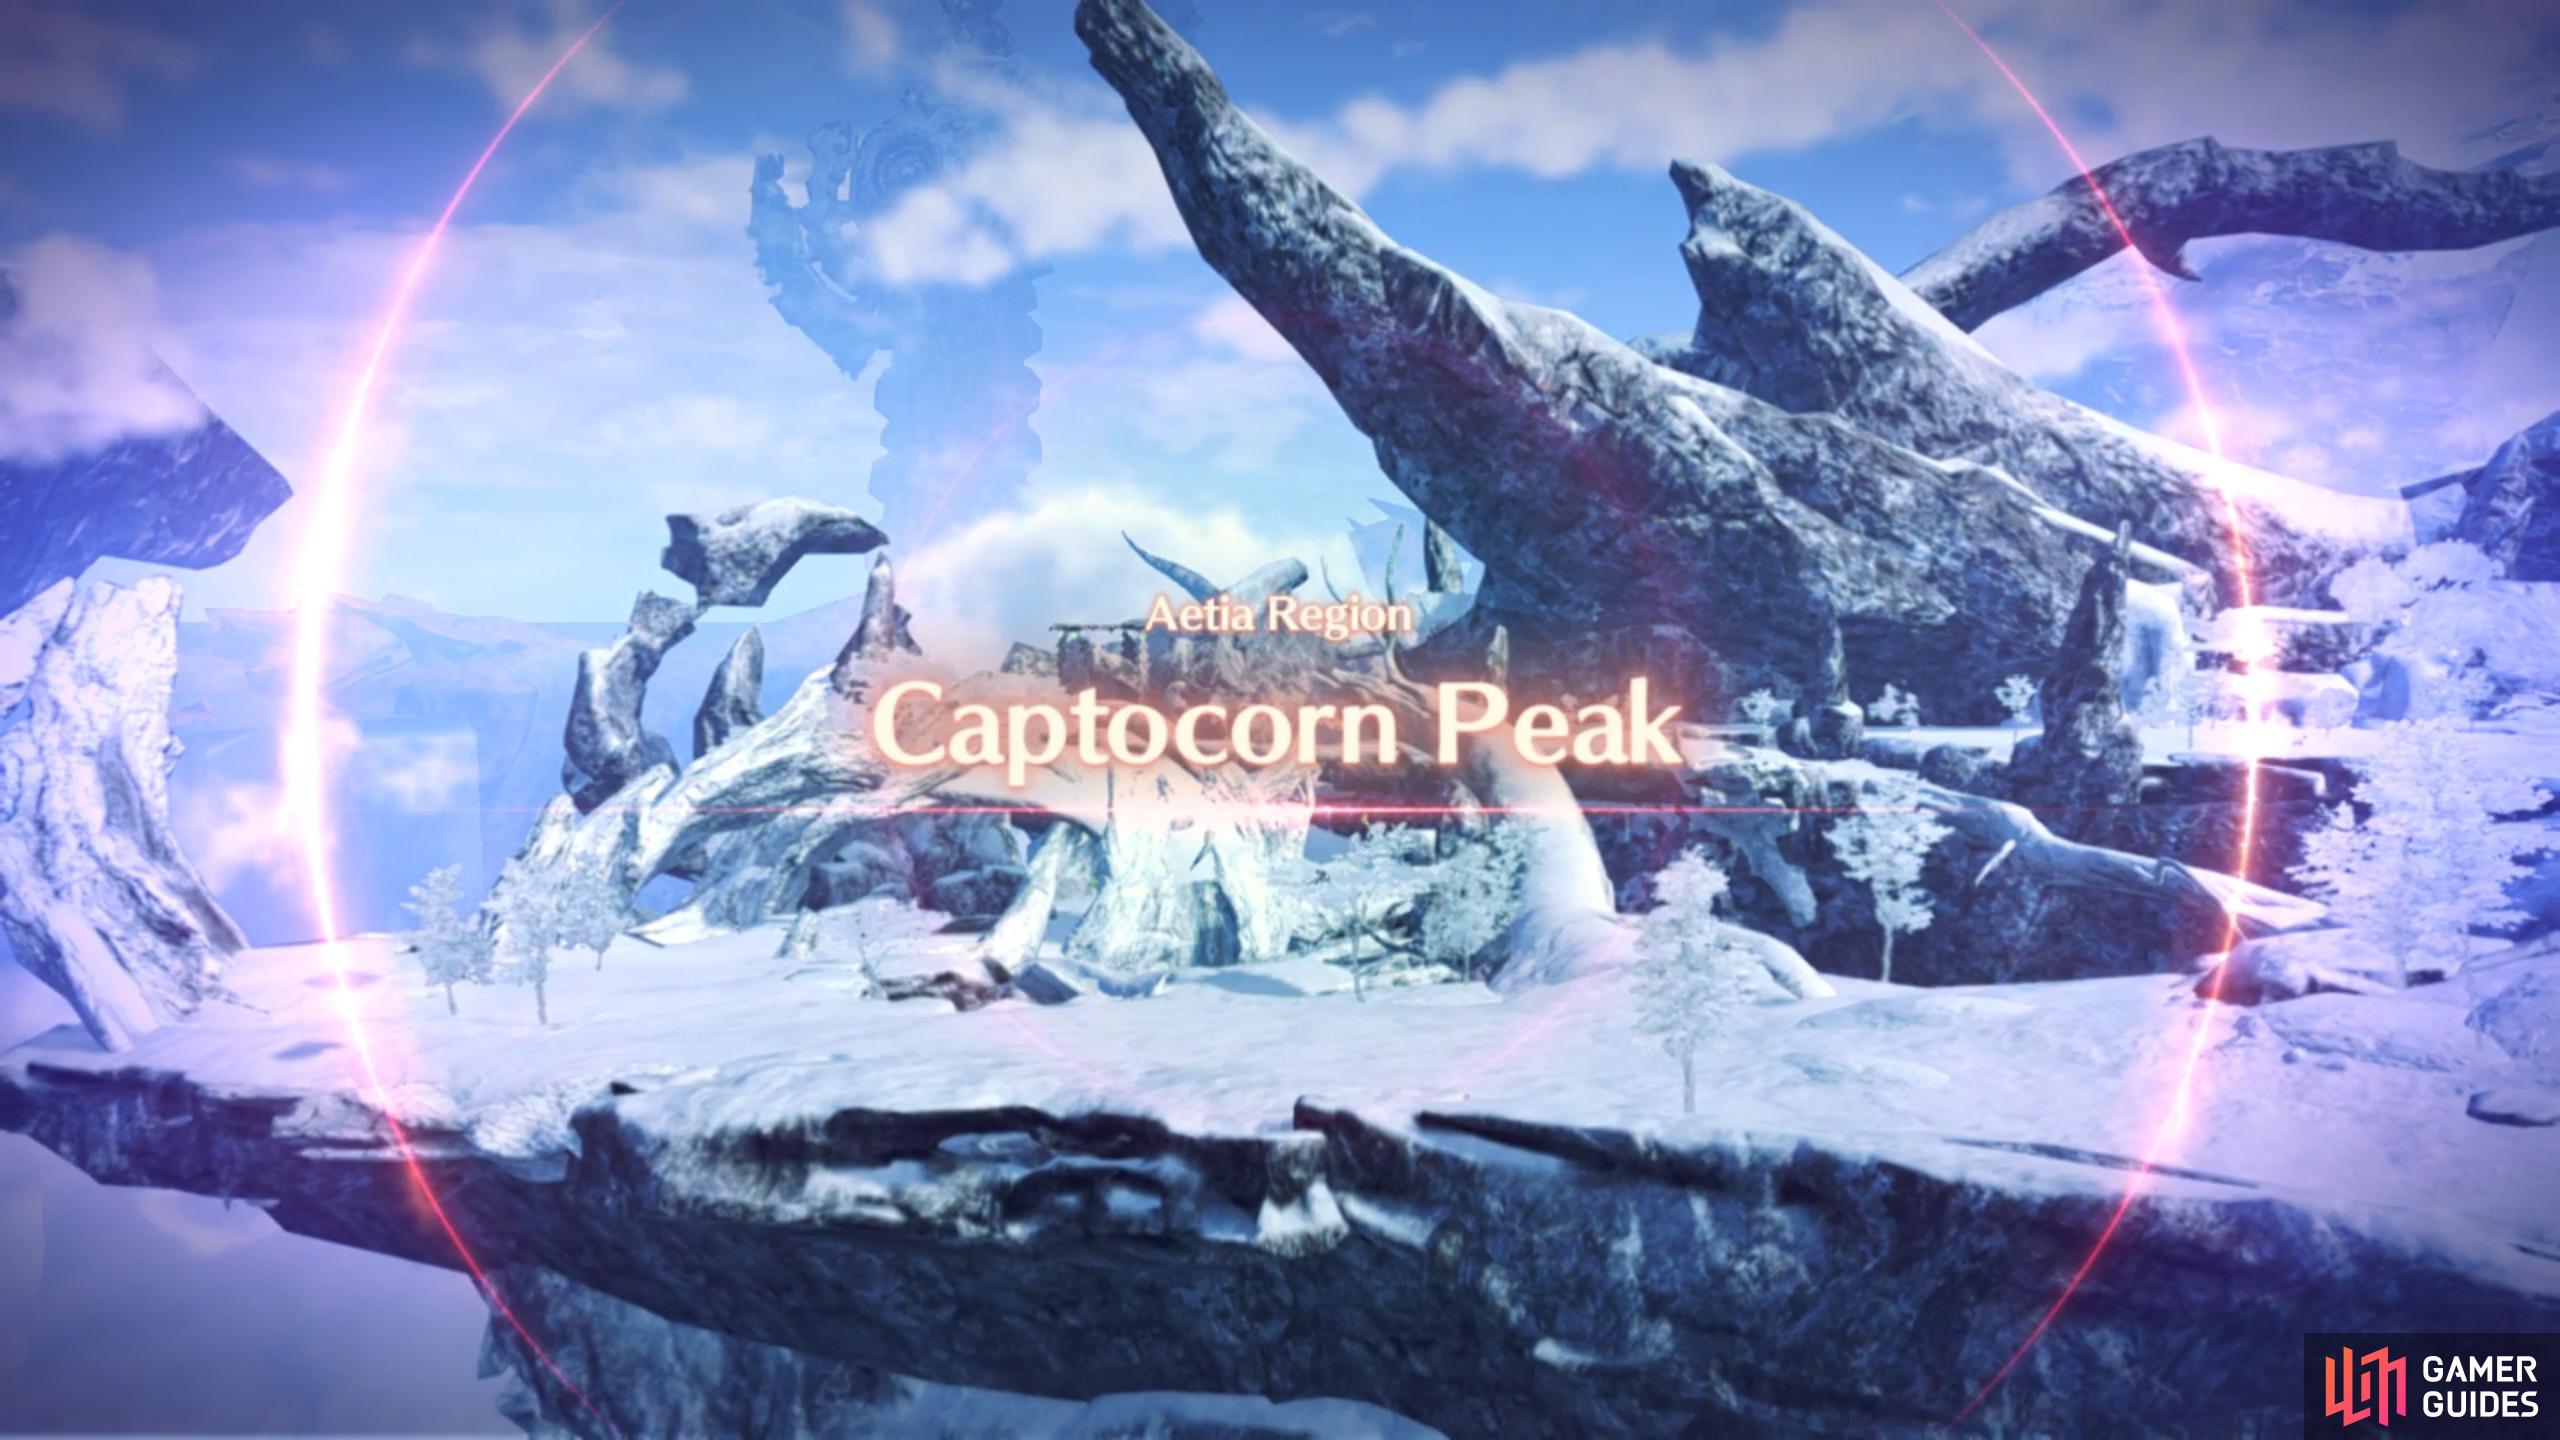 Being so high up, Captocorn Peak has a cold environment.